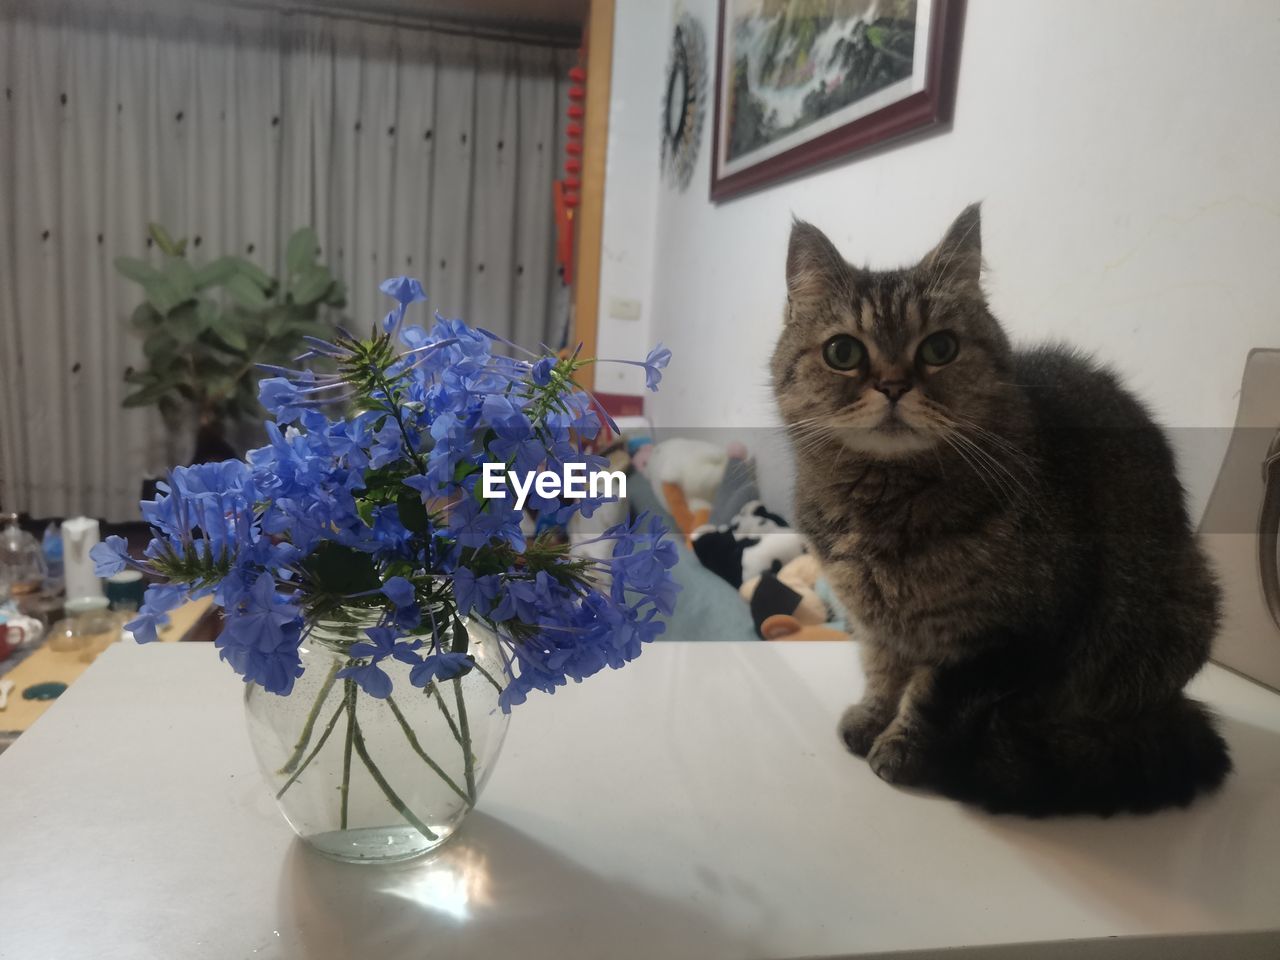 cat, domestic animals, pet, domestic cat, mammal, feline, animal themes, animal, flowering plant, one animal, flower, plant, table, indoors, sitting, no people, felidae, small to medium-sized cats, portrait, looking at camera, kitten, vase, nature, carnivore, animal hair, home interior, whiskers